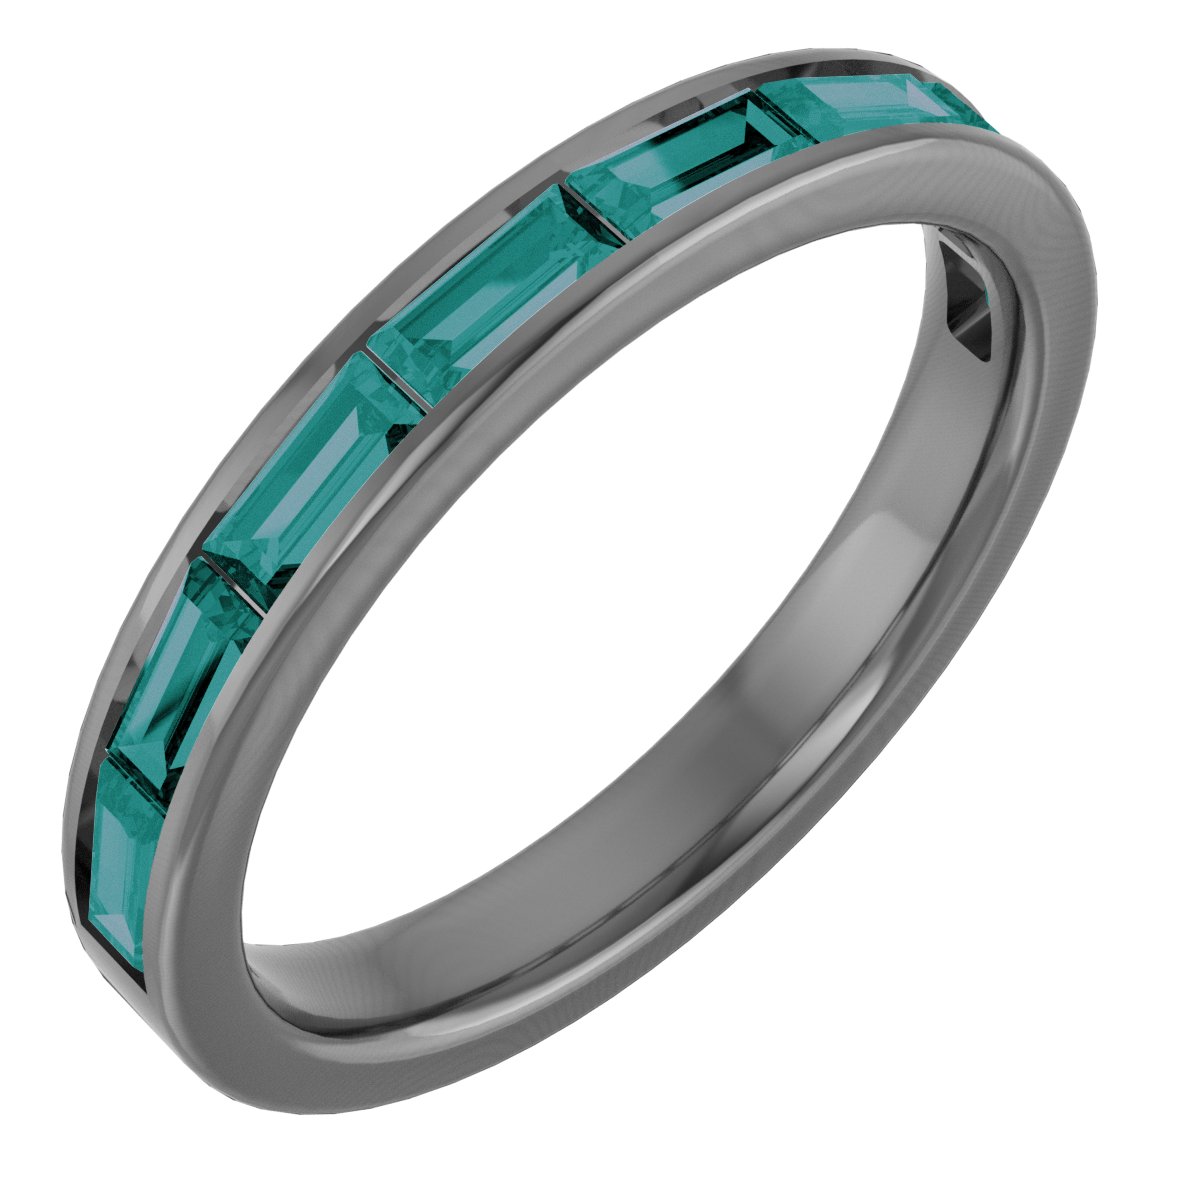 14K White Lab-Grown Alexandrite Stackable Ring